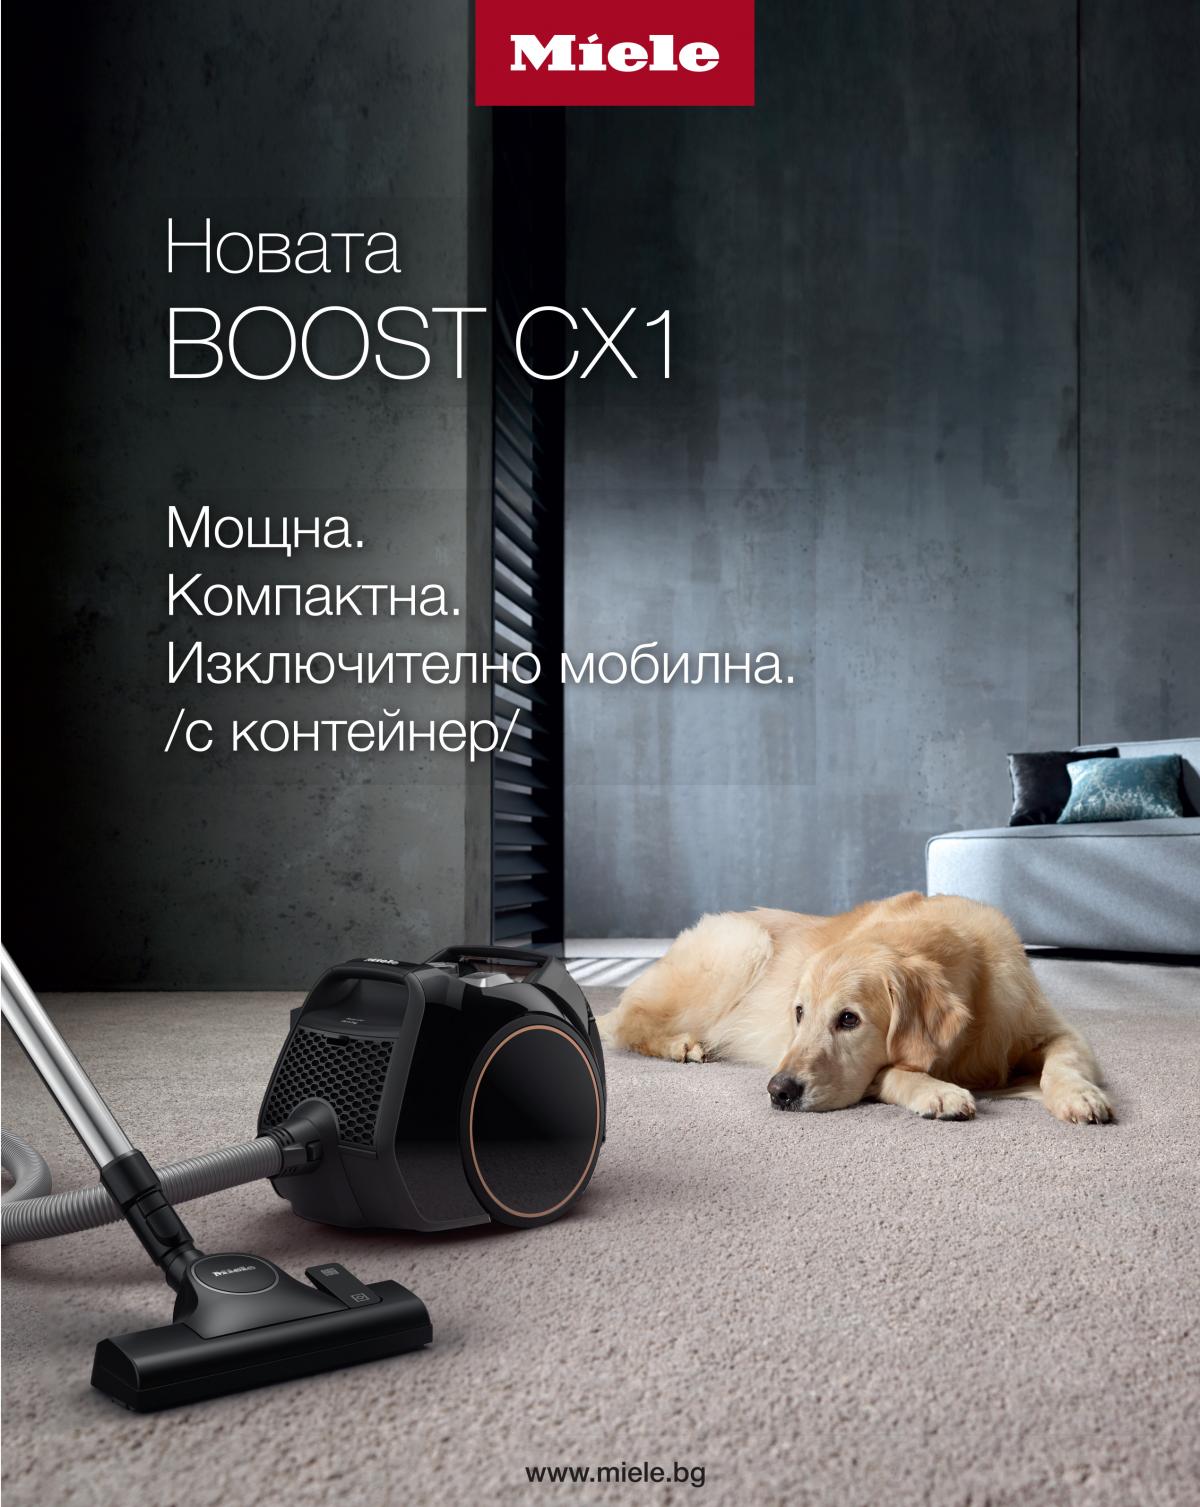 Boost CX1 from Miele: Clean perfectly and easily with the new vacuum cleaner